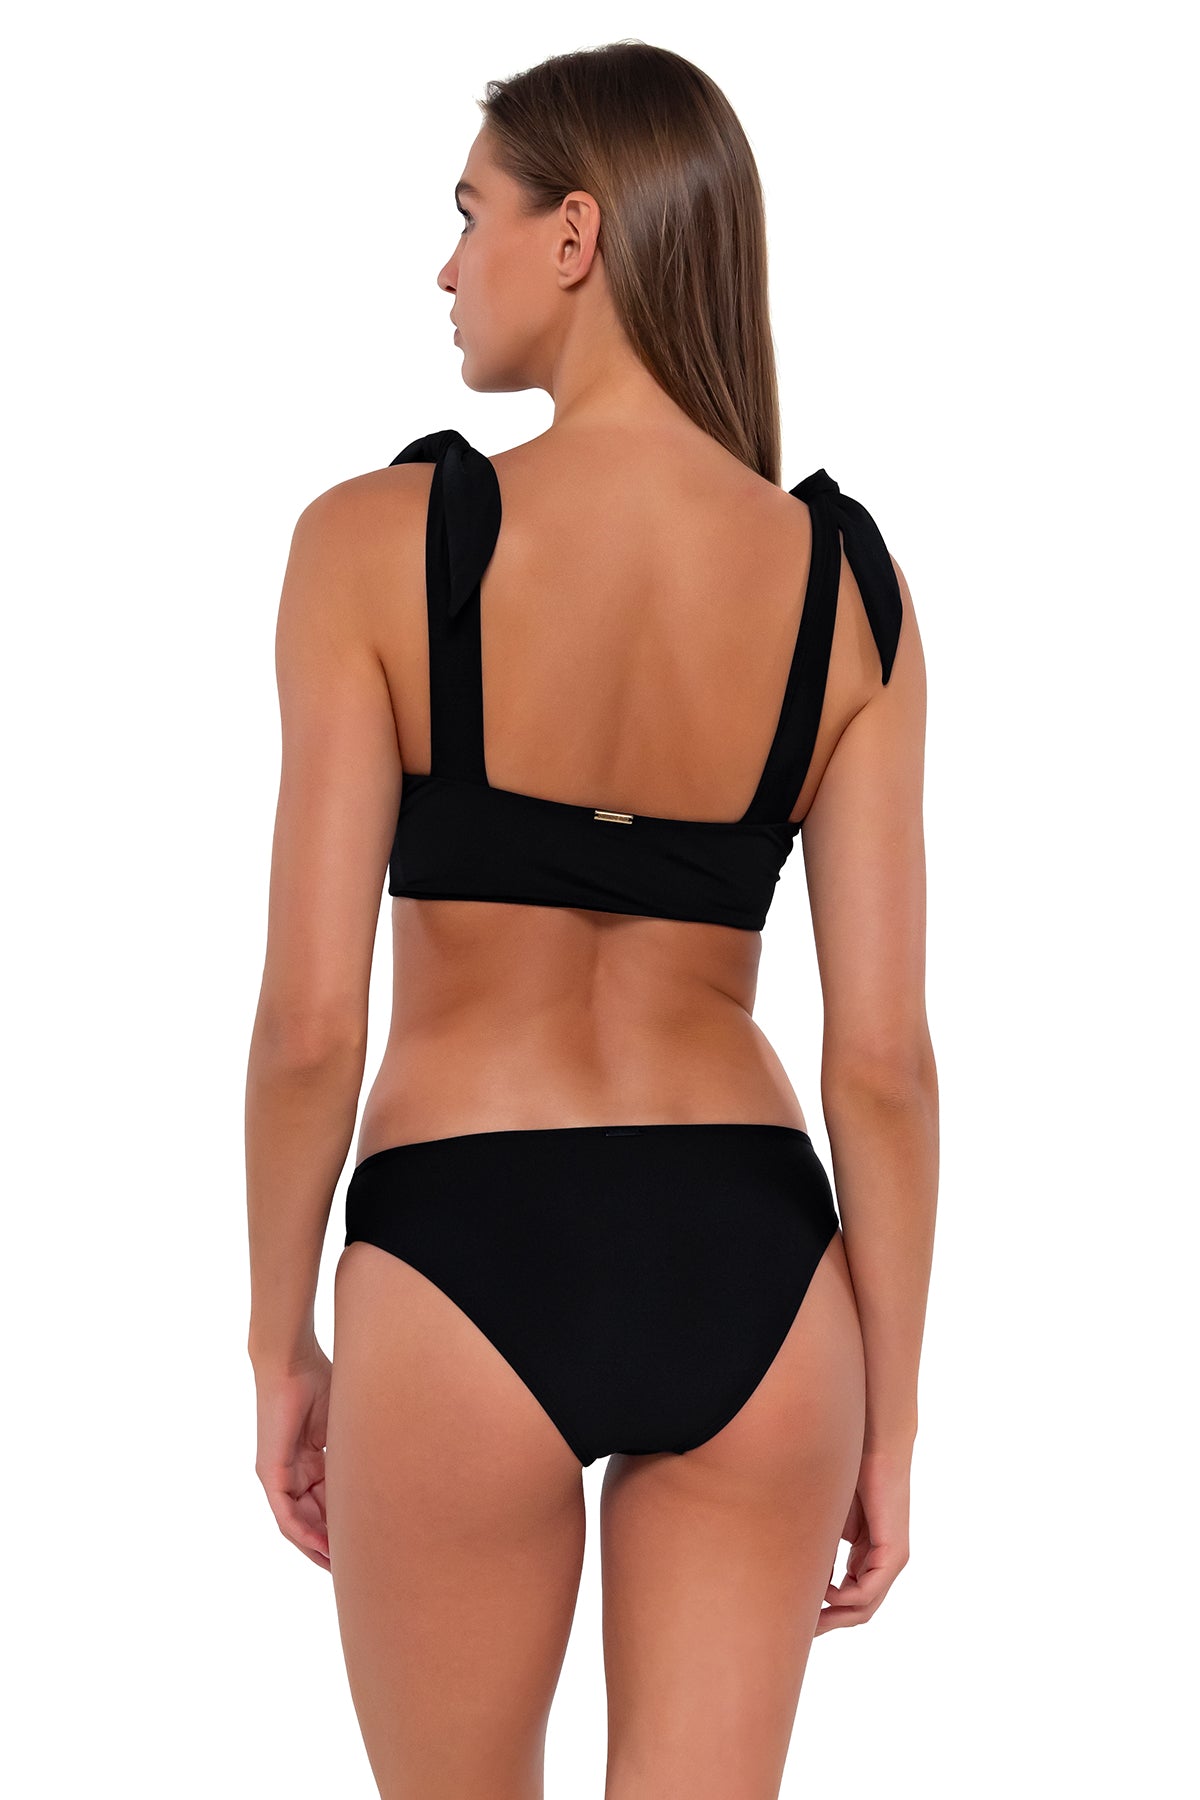 Back pose #1 of Daria wearing Sunsets Black Lily Top with matching Collins Hipster bikini bottom